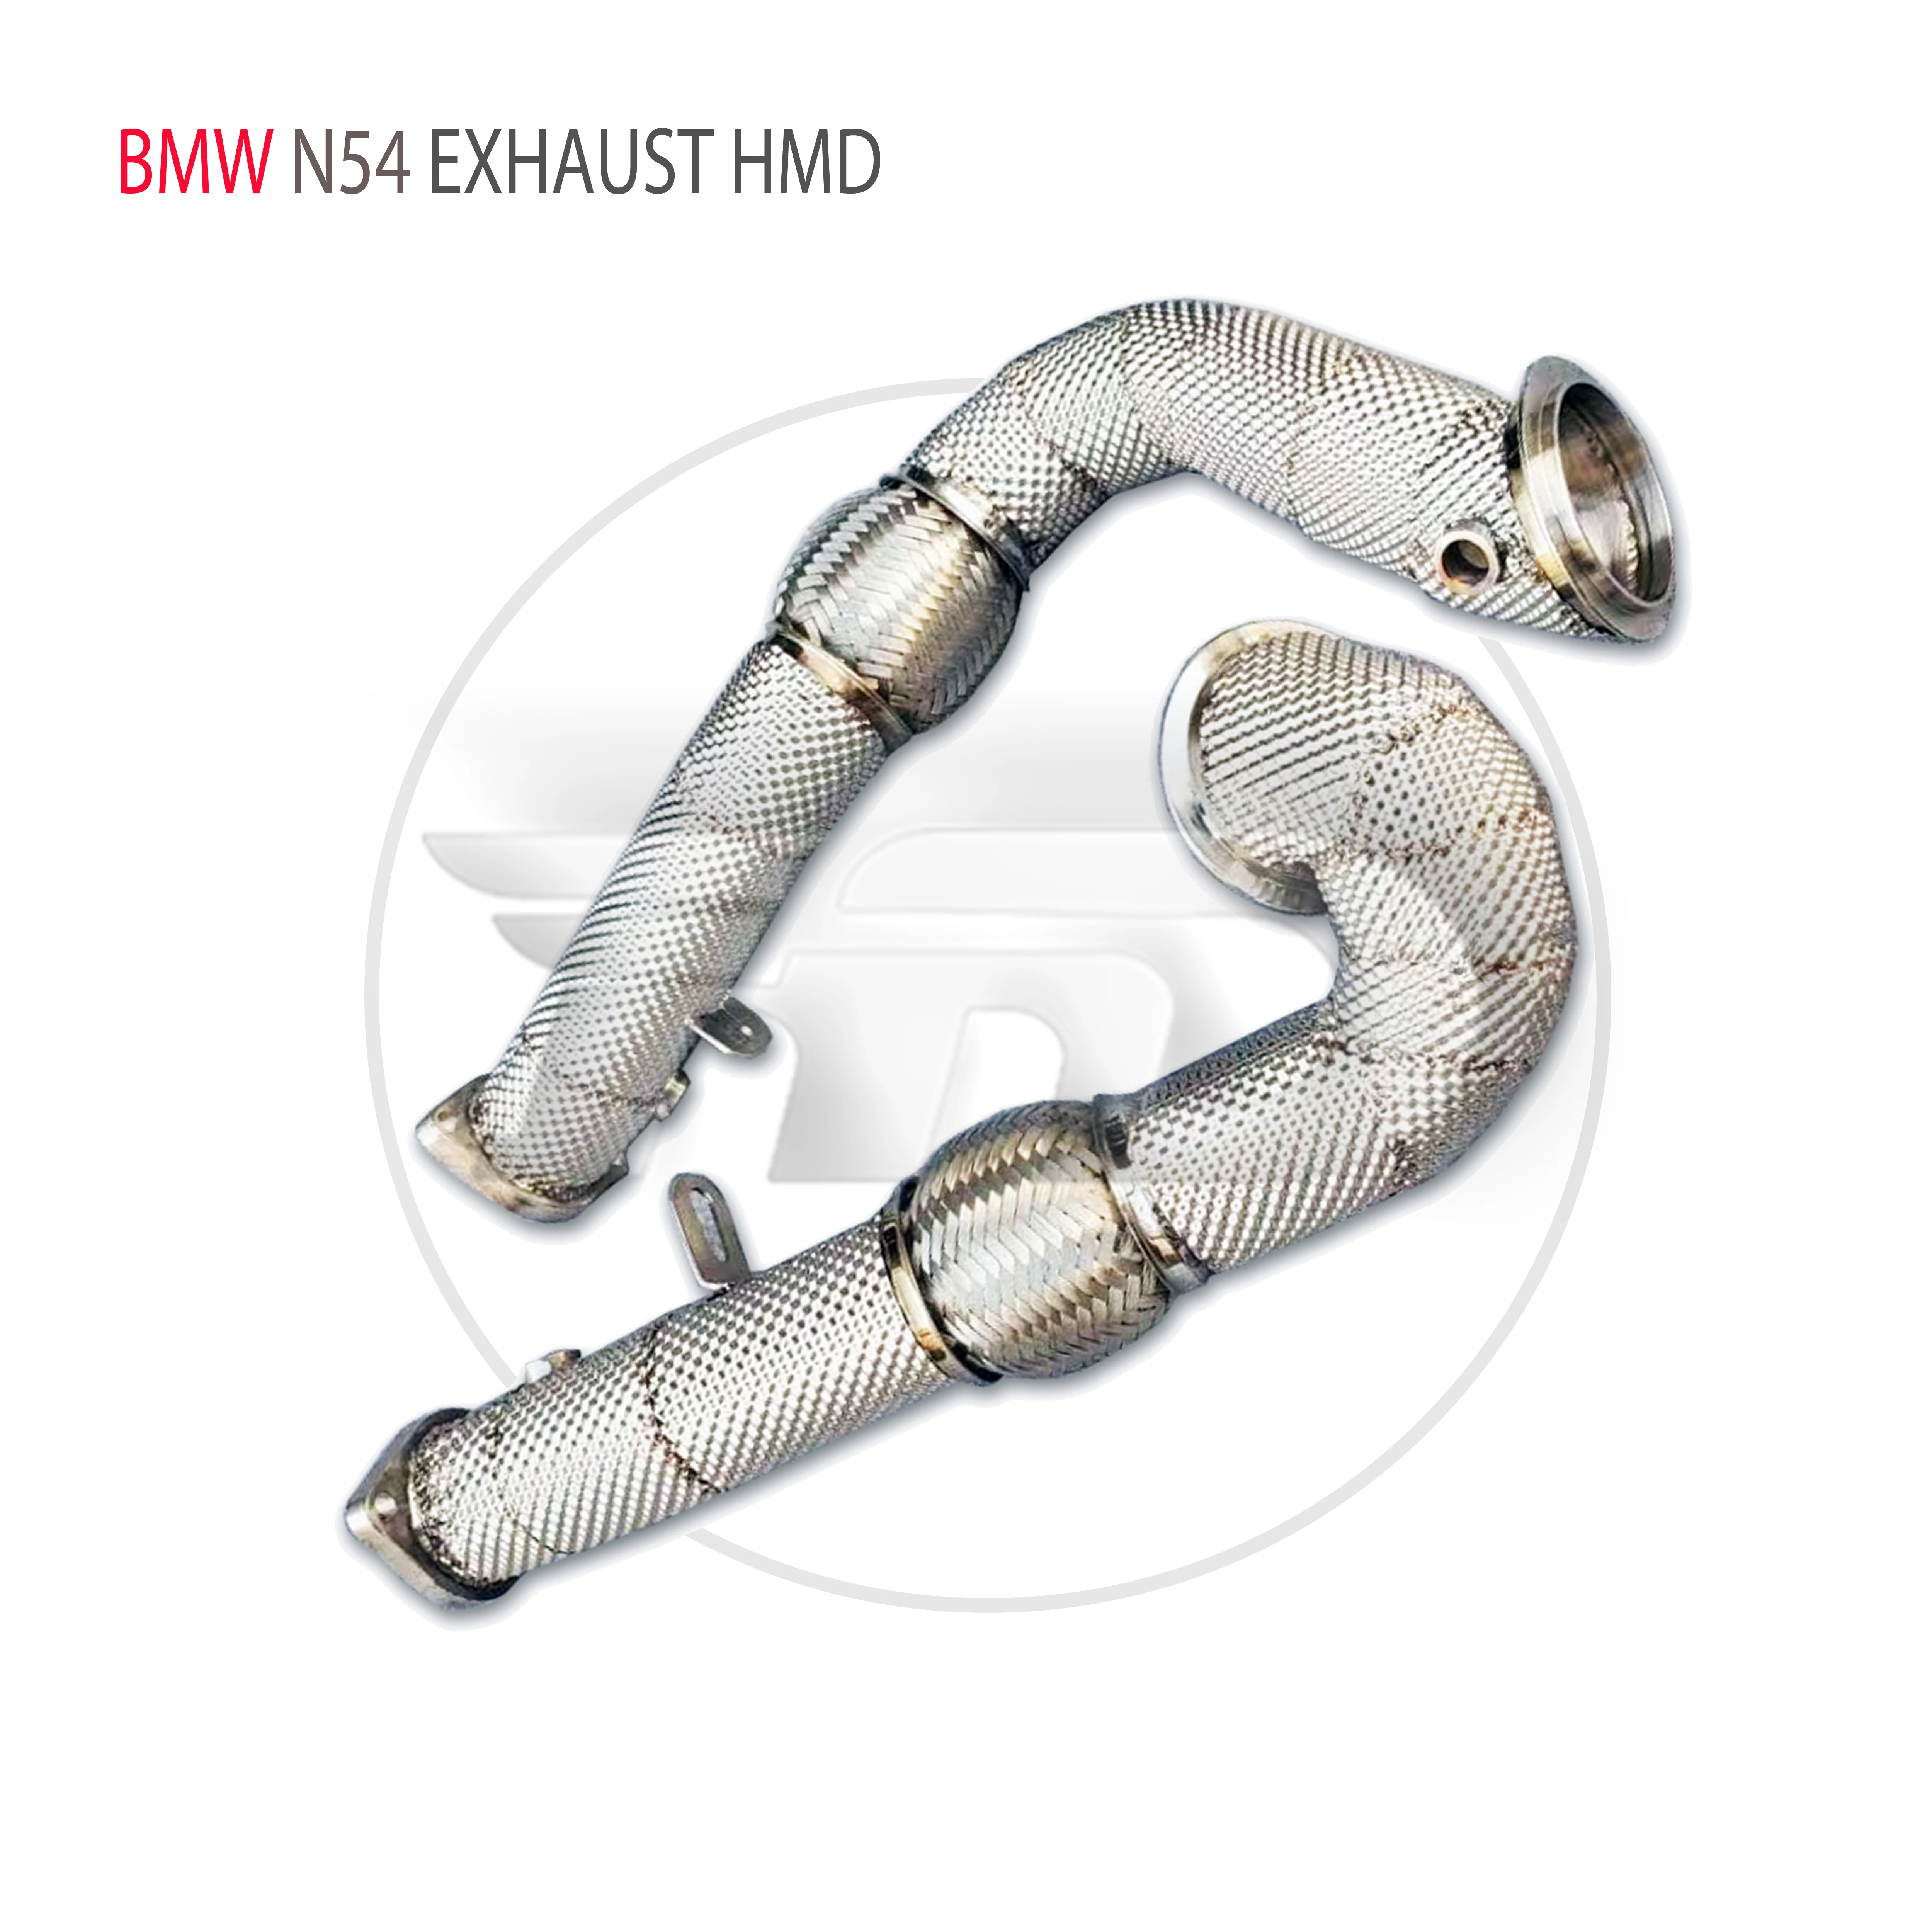 

HMD Exhaust System High Flow Performance Downpipe for BMW 740i N54 Engine 3.0T 2008-2012 Car Accessories With Cat Pipe